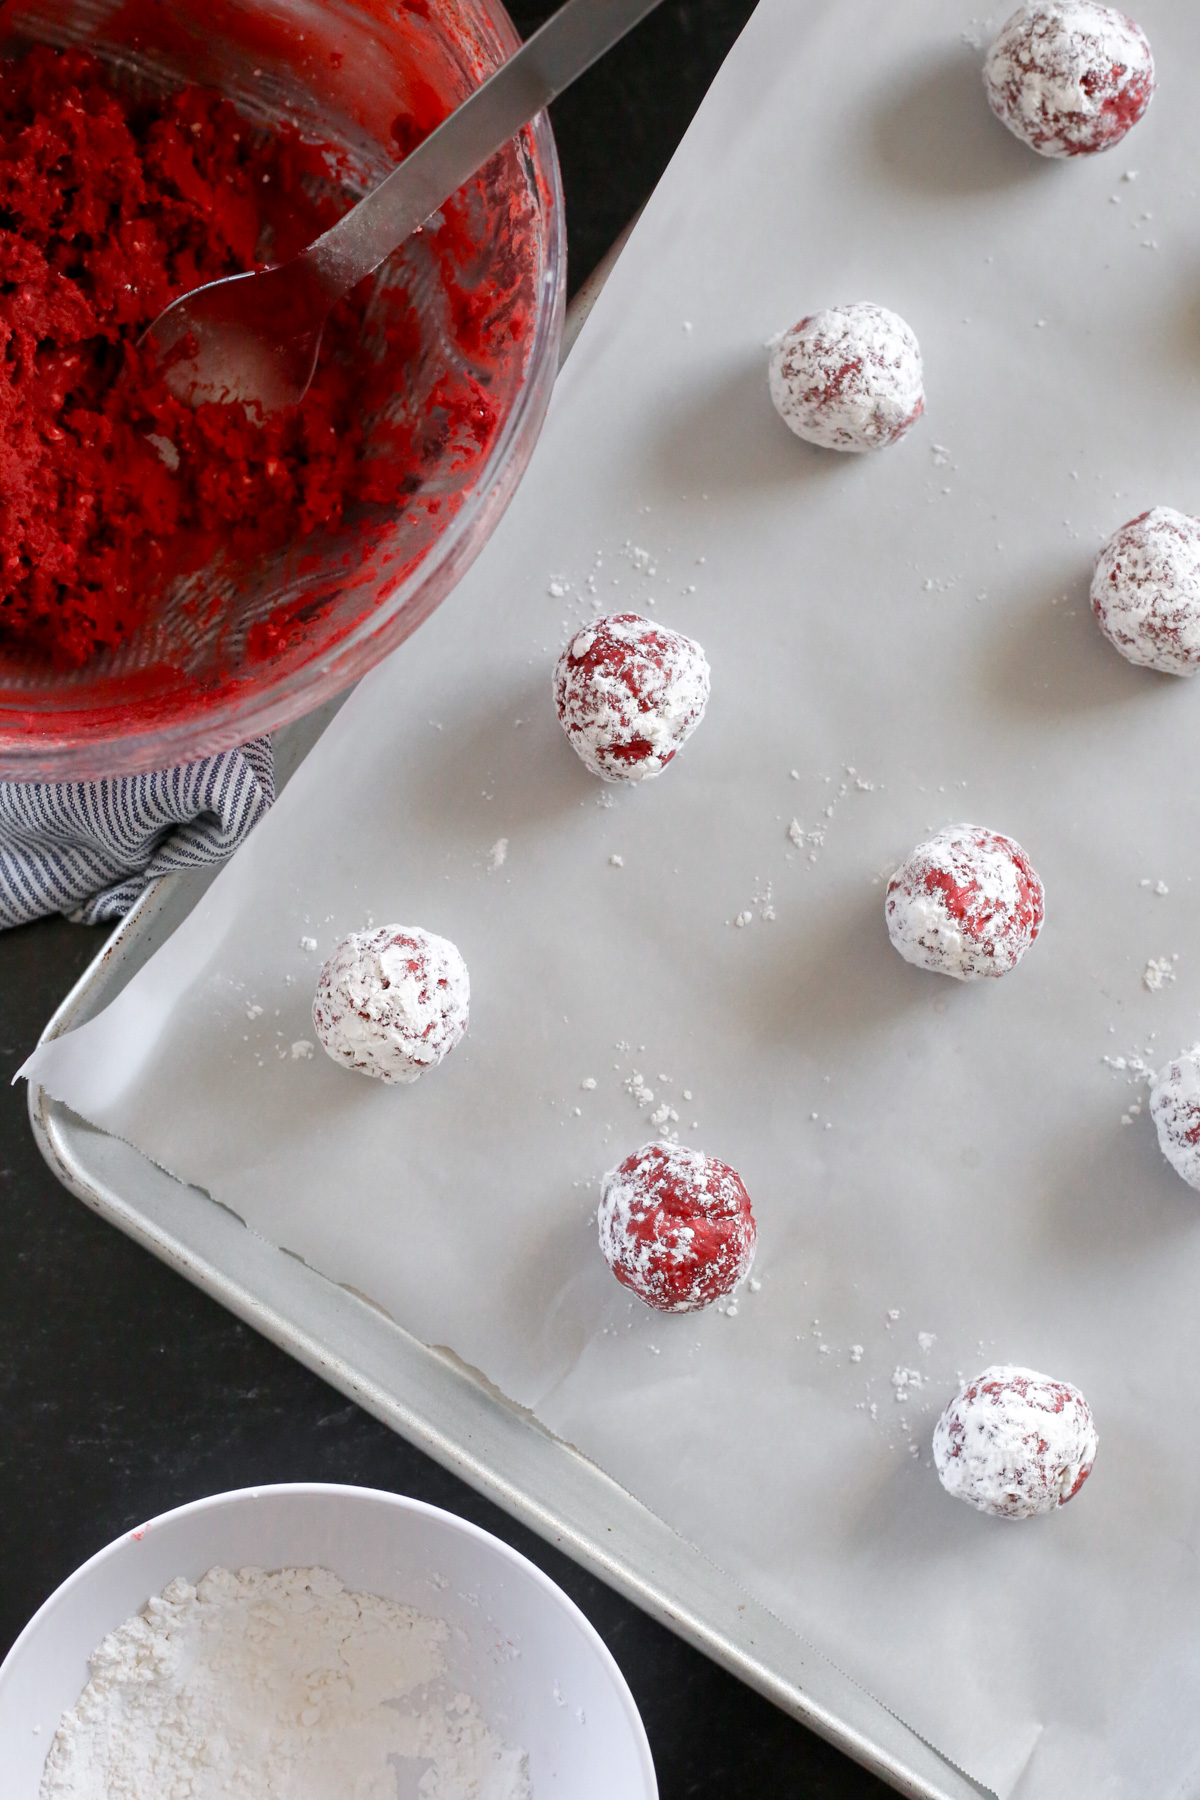 Overhead view of a large baking sheet lined with white parchment paper with prepared dough balls made using a red velvet cake mix and coated with powdered sugar